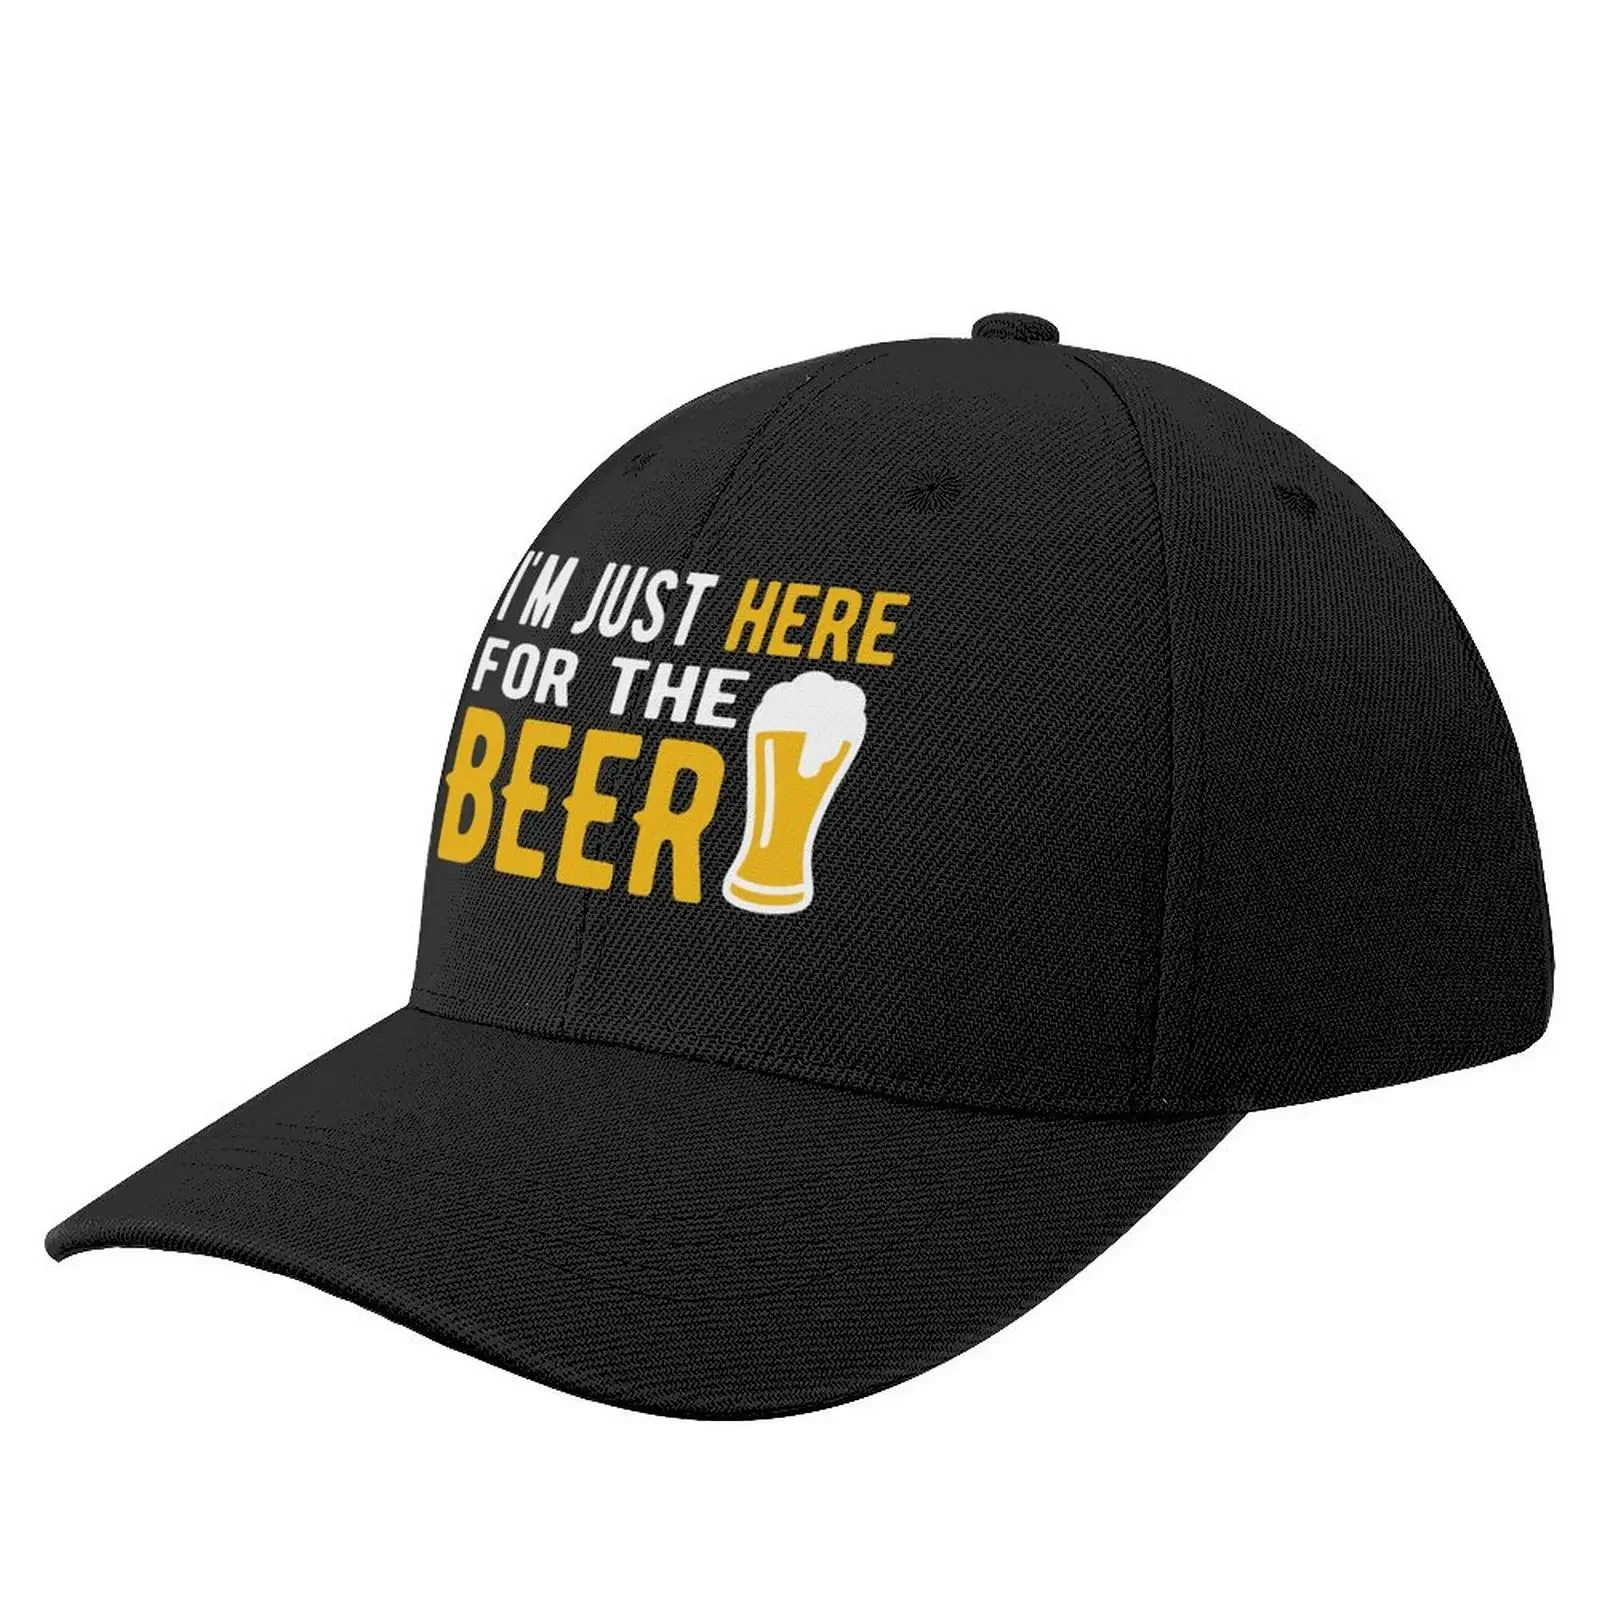 

I'm just here for the Beer Baseball Cap fashionable Golf Wear Luxury Man Hat Caps Women Men's